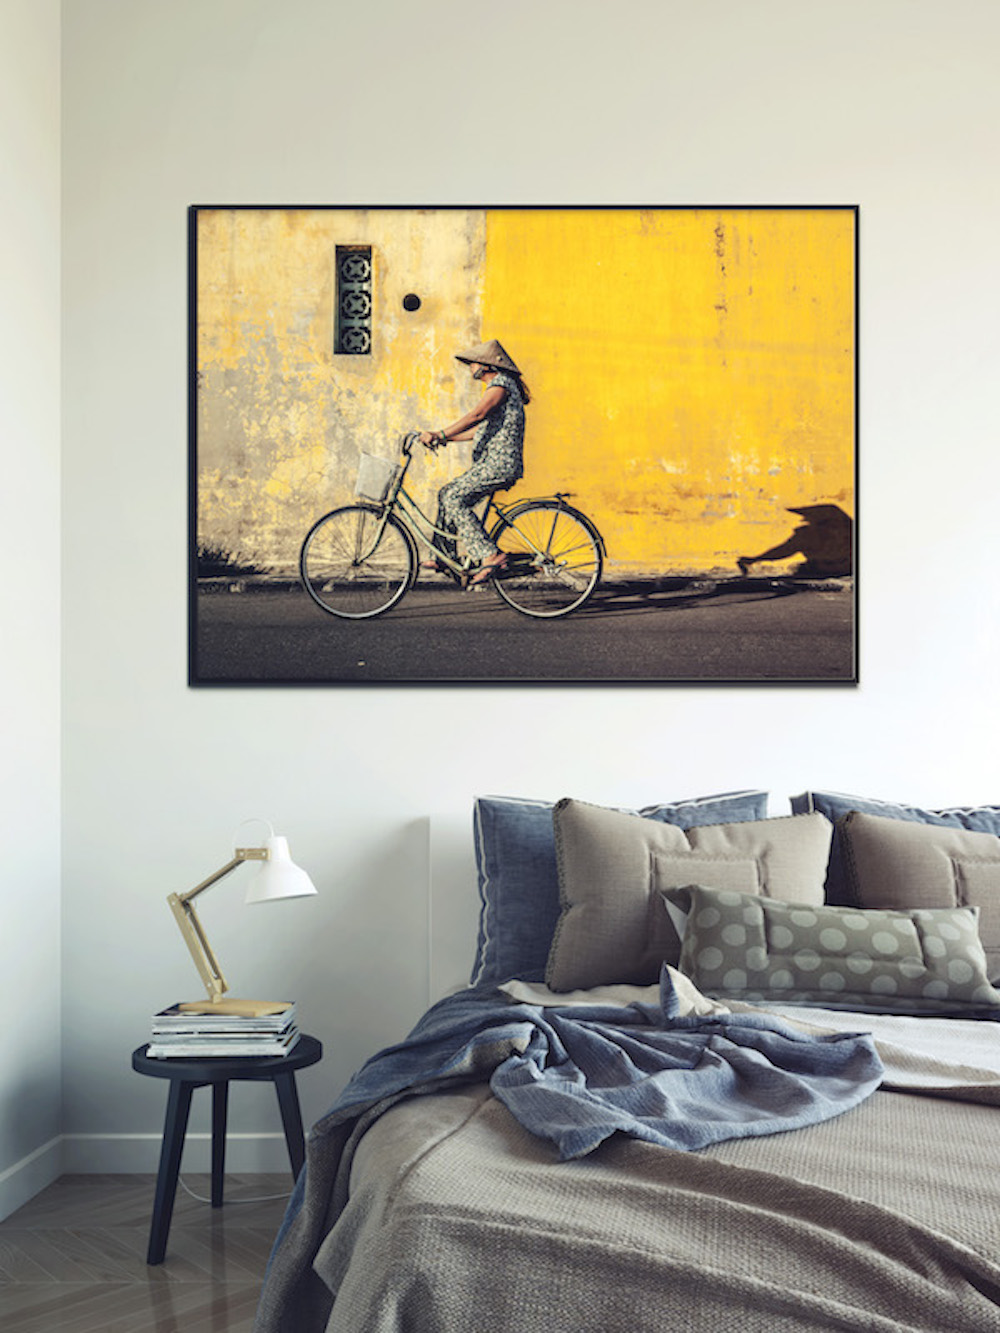 Missing a touch of color on your bedroom walls? This framed art print by Jörg Faißt will do.